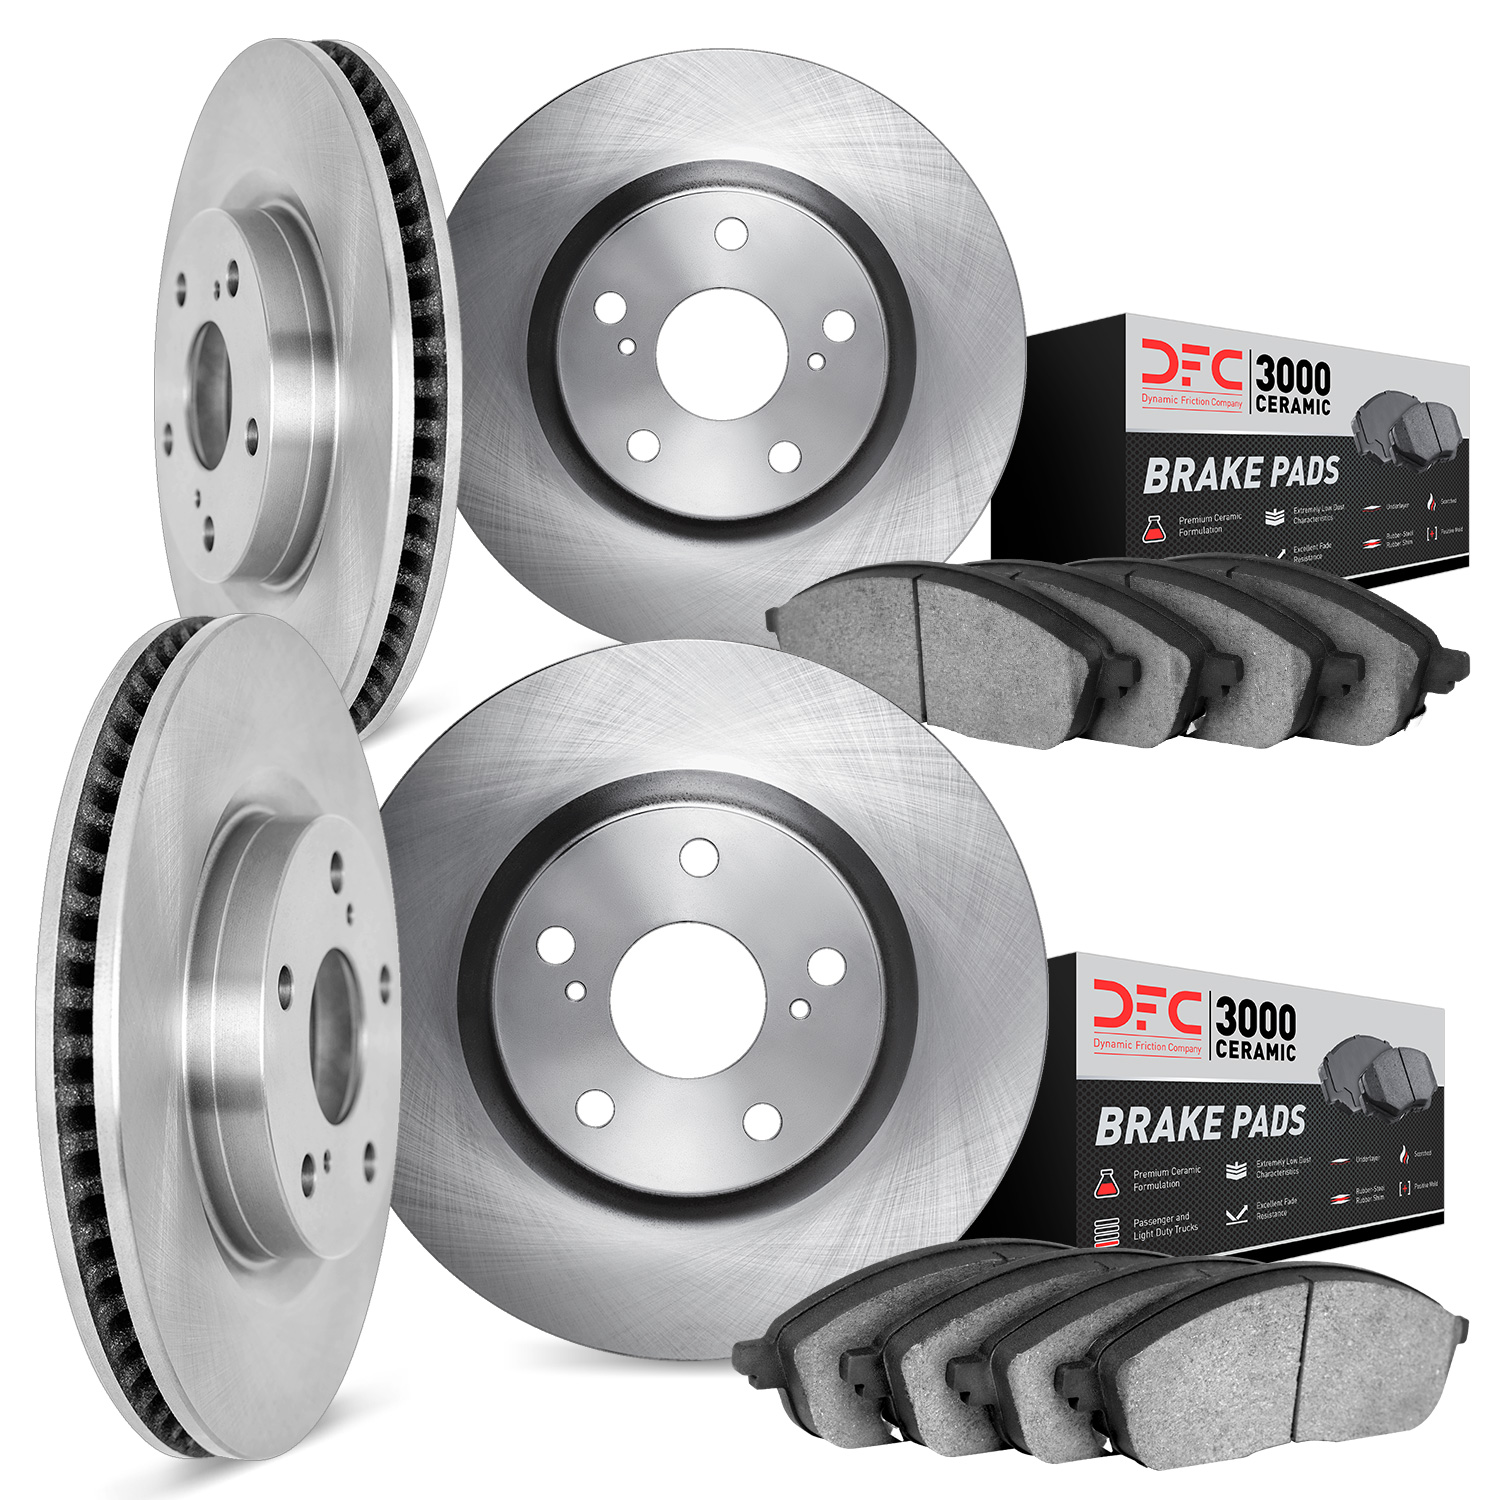 6304-31058 Brake Rotors with 3000-Series Ceramic Brake Pads Kit, 2004-2010 BMW, Position: Front and Rear